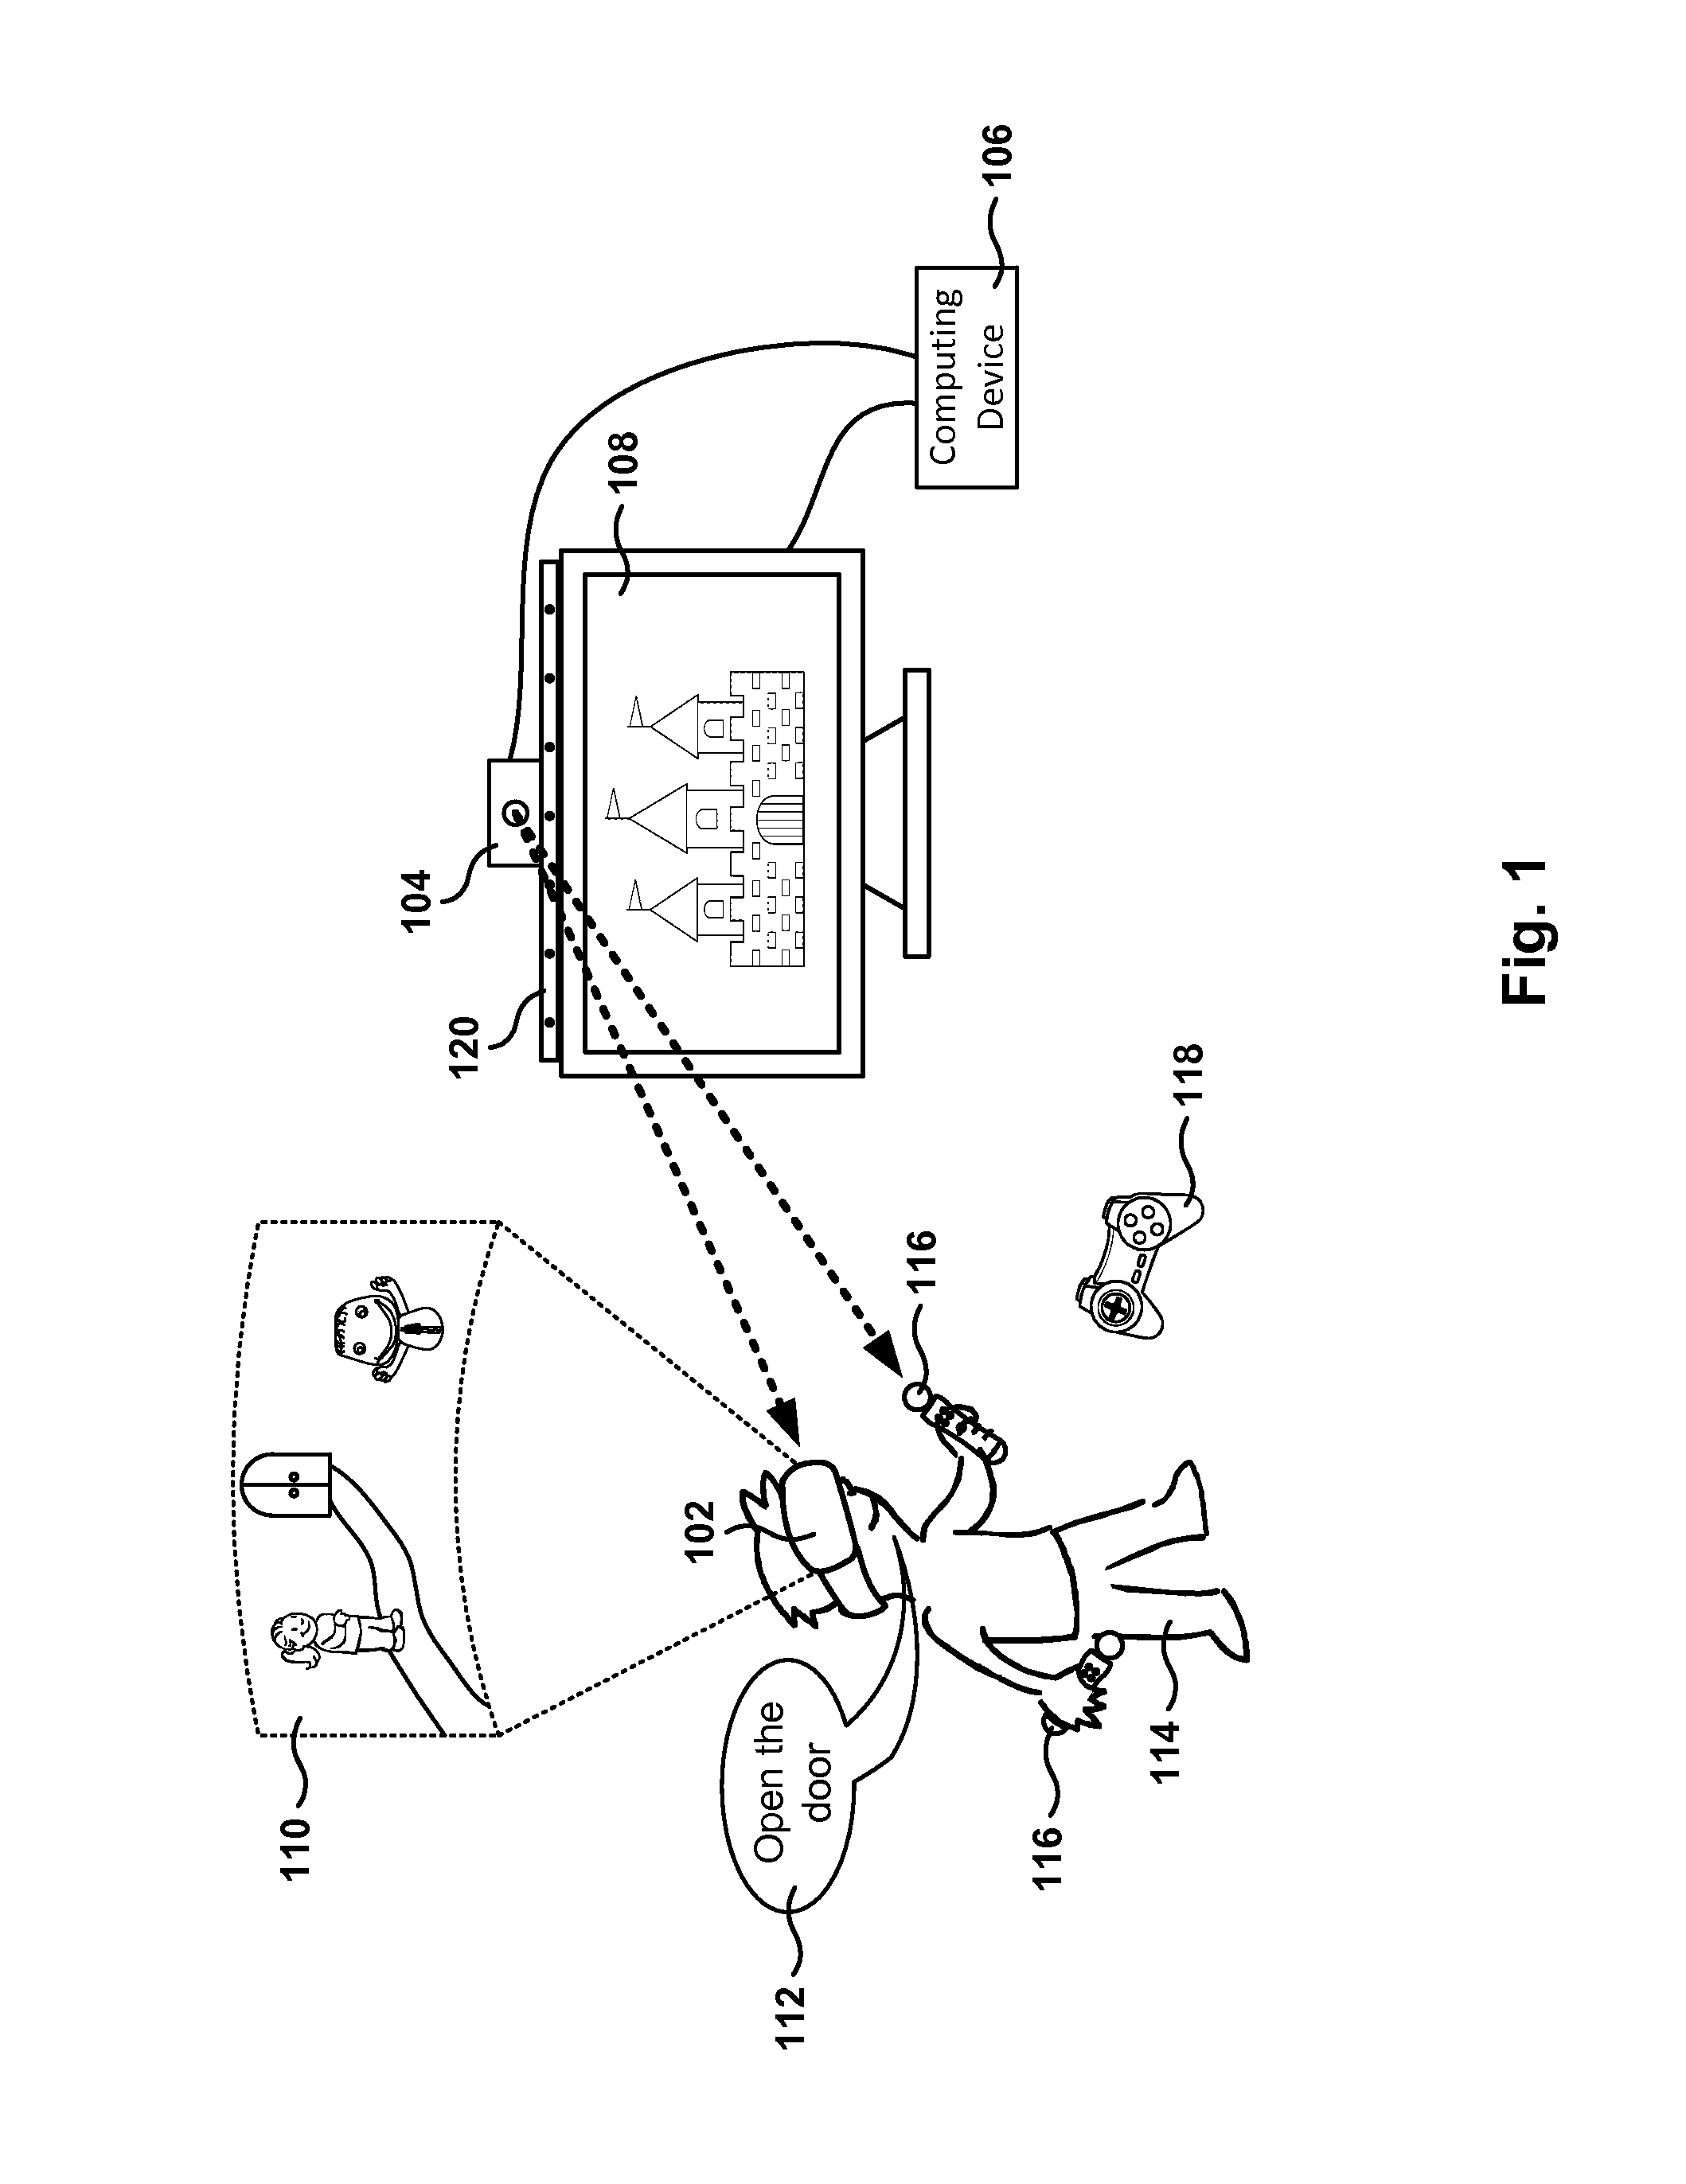 Switching mode of operation in a head mounted display